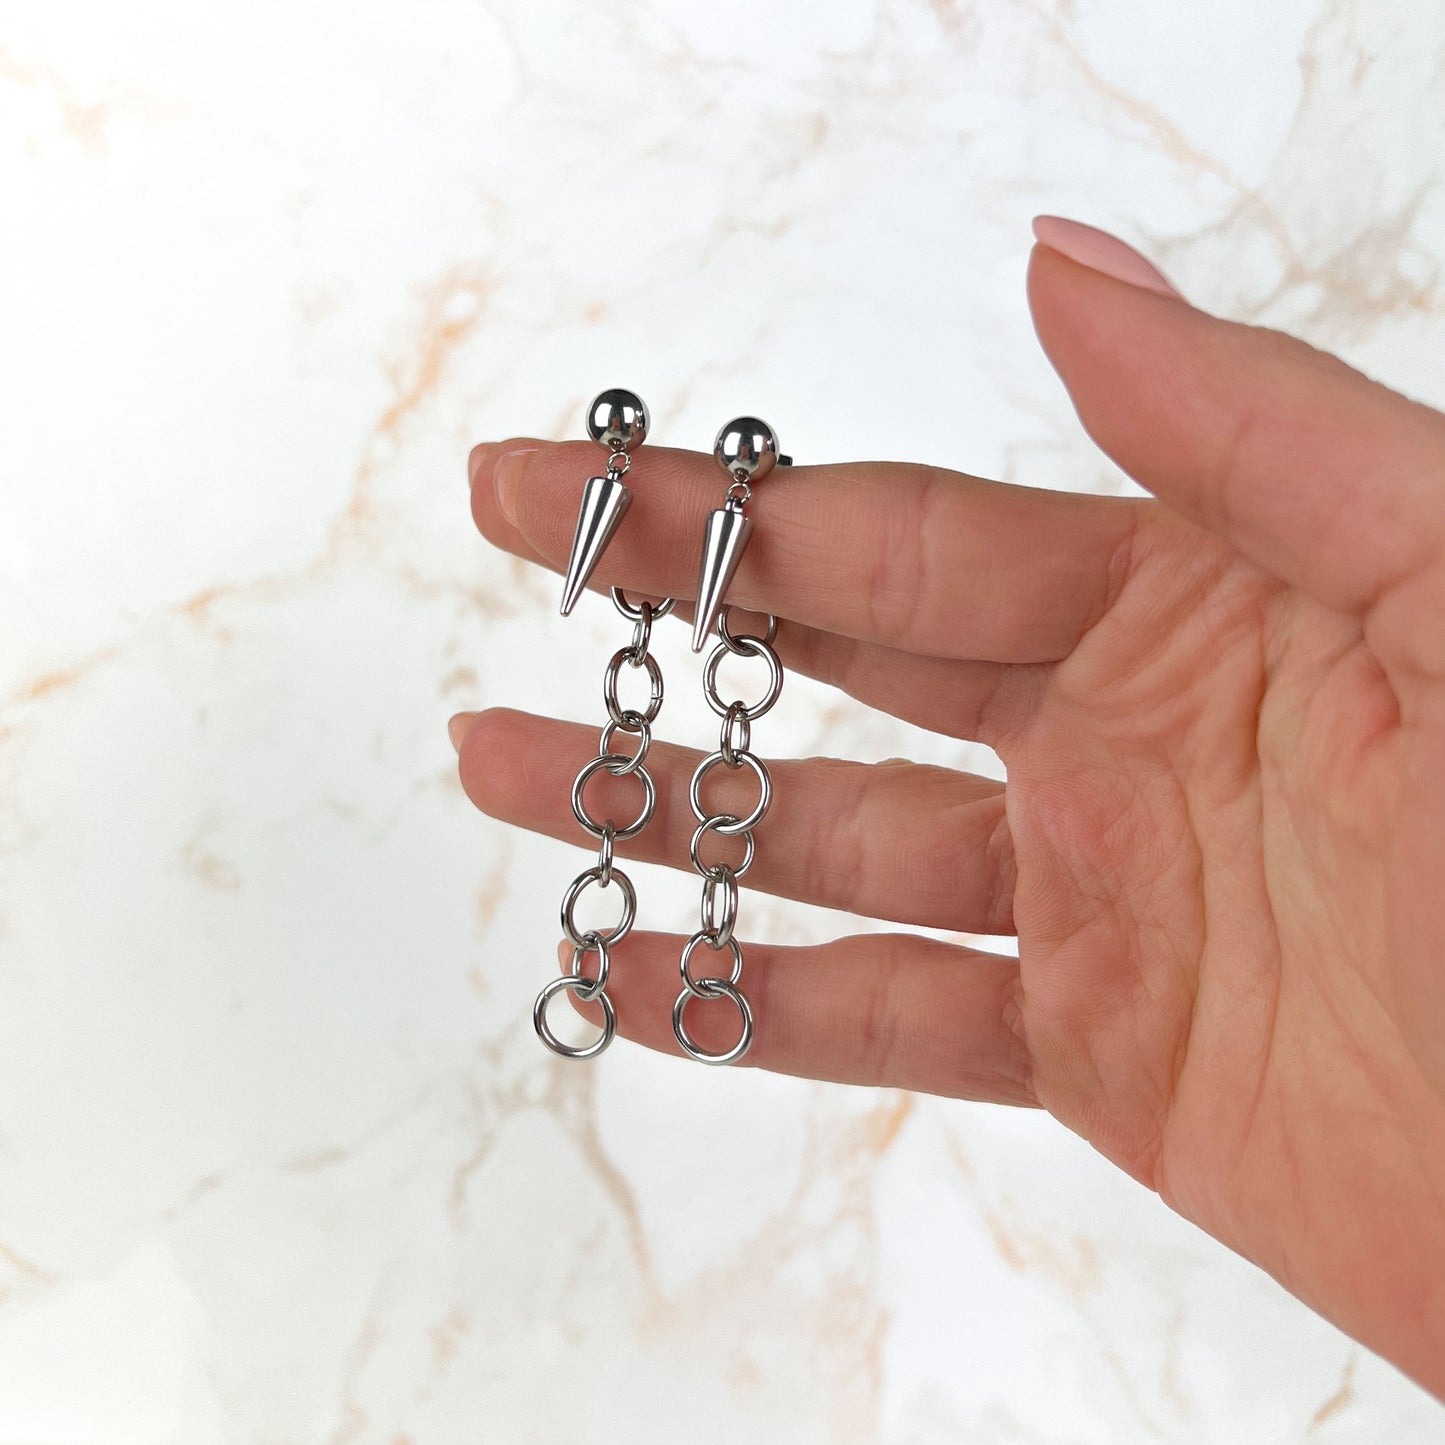 Spikes and back chunky chain stainless steel stud earrings